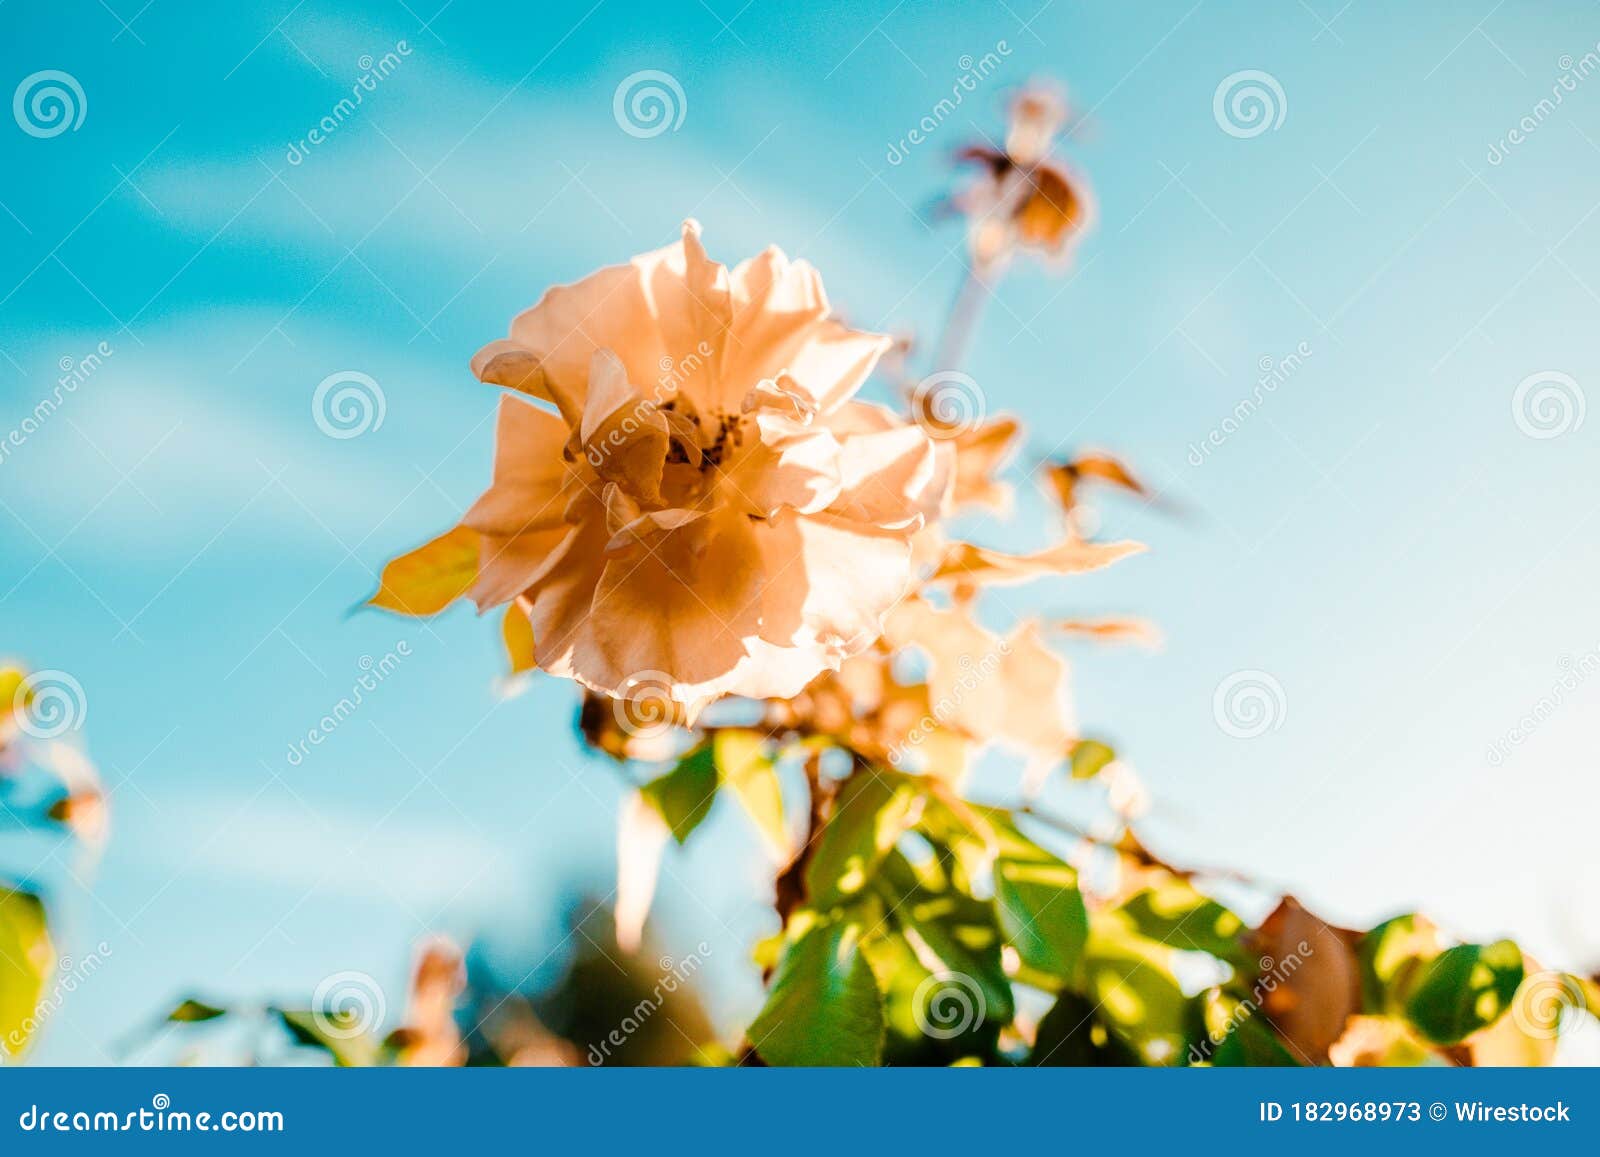 Closeup Shot of an Amazing White Rose Flower on a Blue Sky Background ...